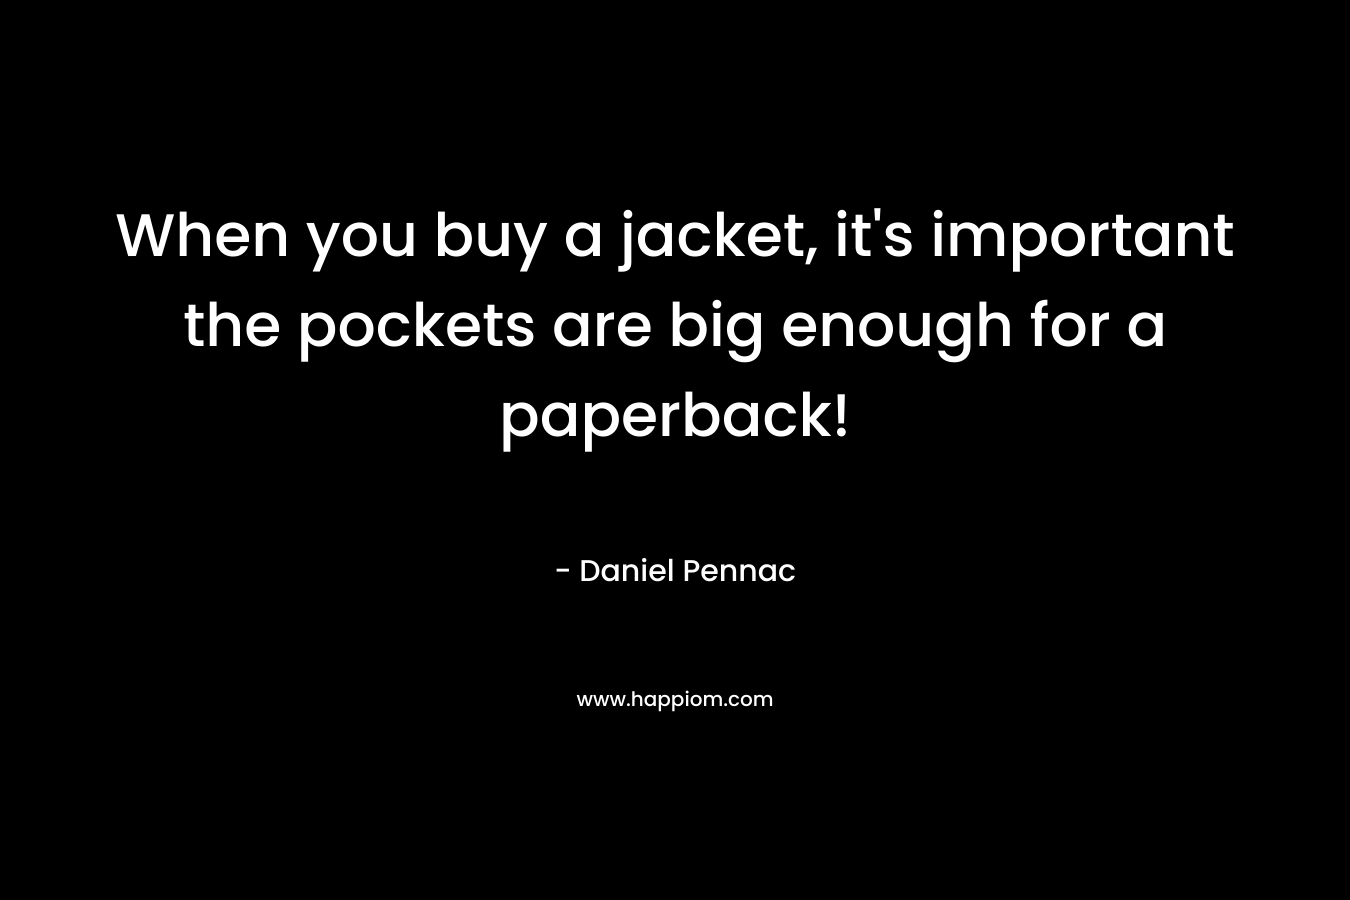 When you buy a jacket, it's important the pockets are big enough for a paperback!